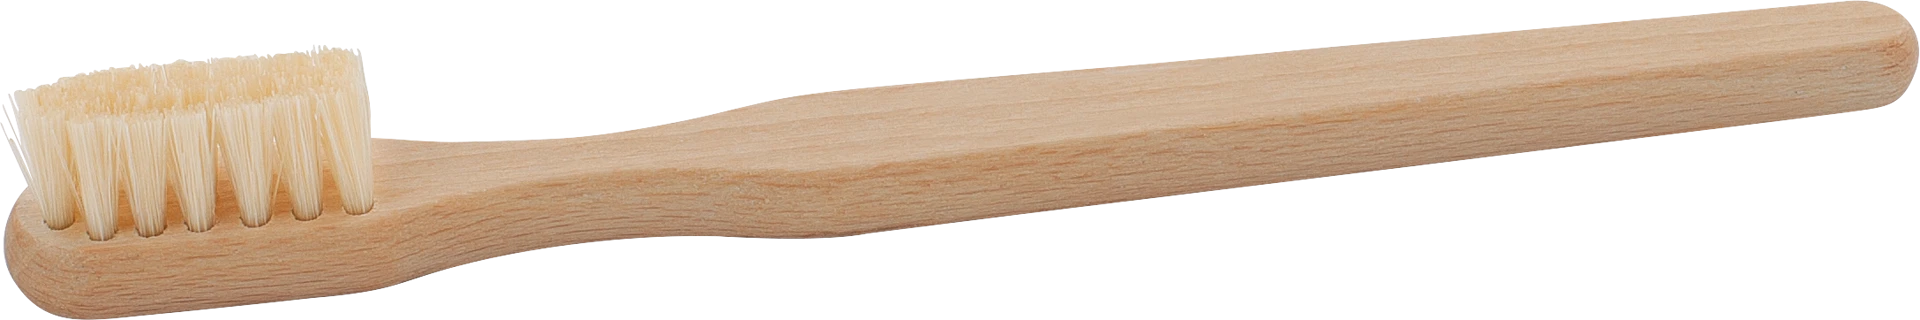 wooden toothbrush